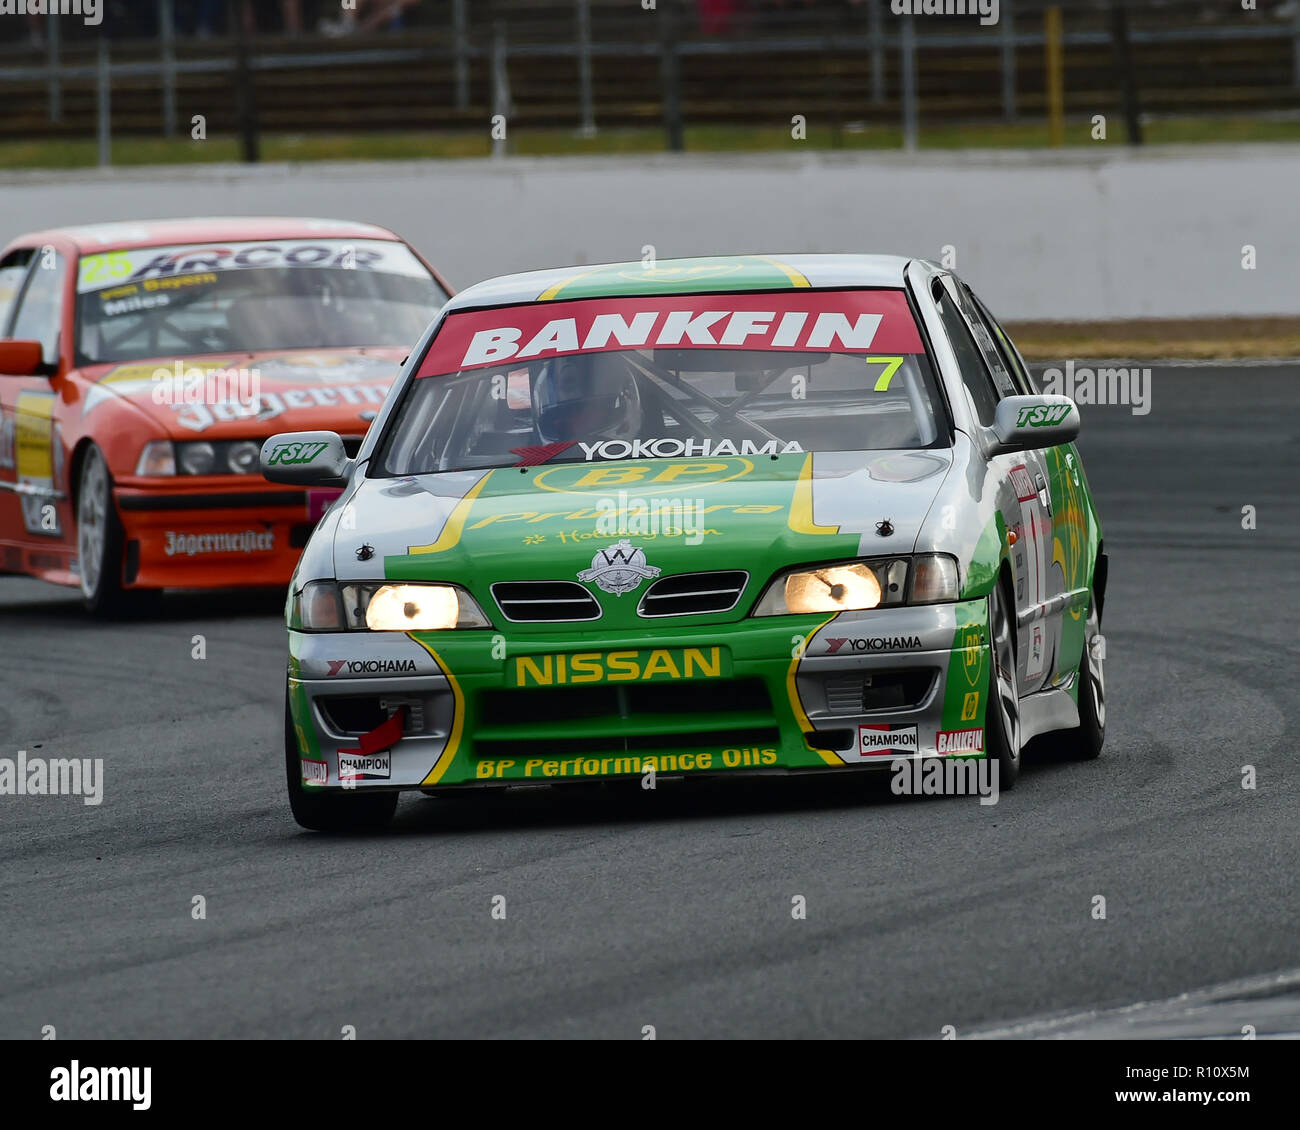 Frisco, Nissan Primera, Super Touring Trophy, Silverstone Classic, July 2018, Silverstone, Northamptonshire, England, circuit racing, cjm-photography, Stock Photo